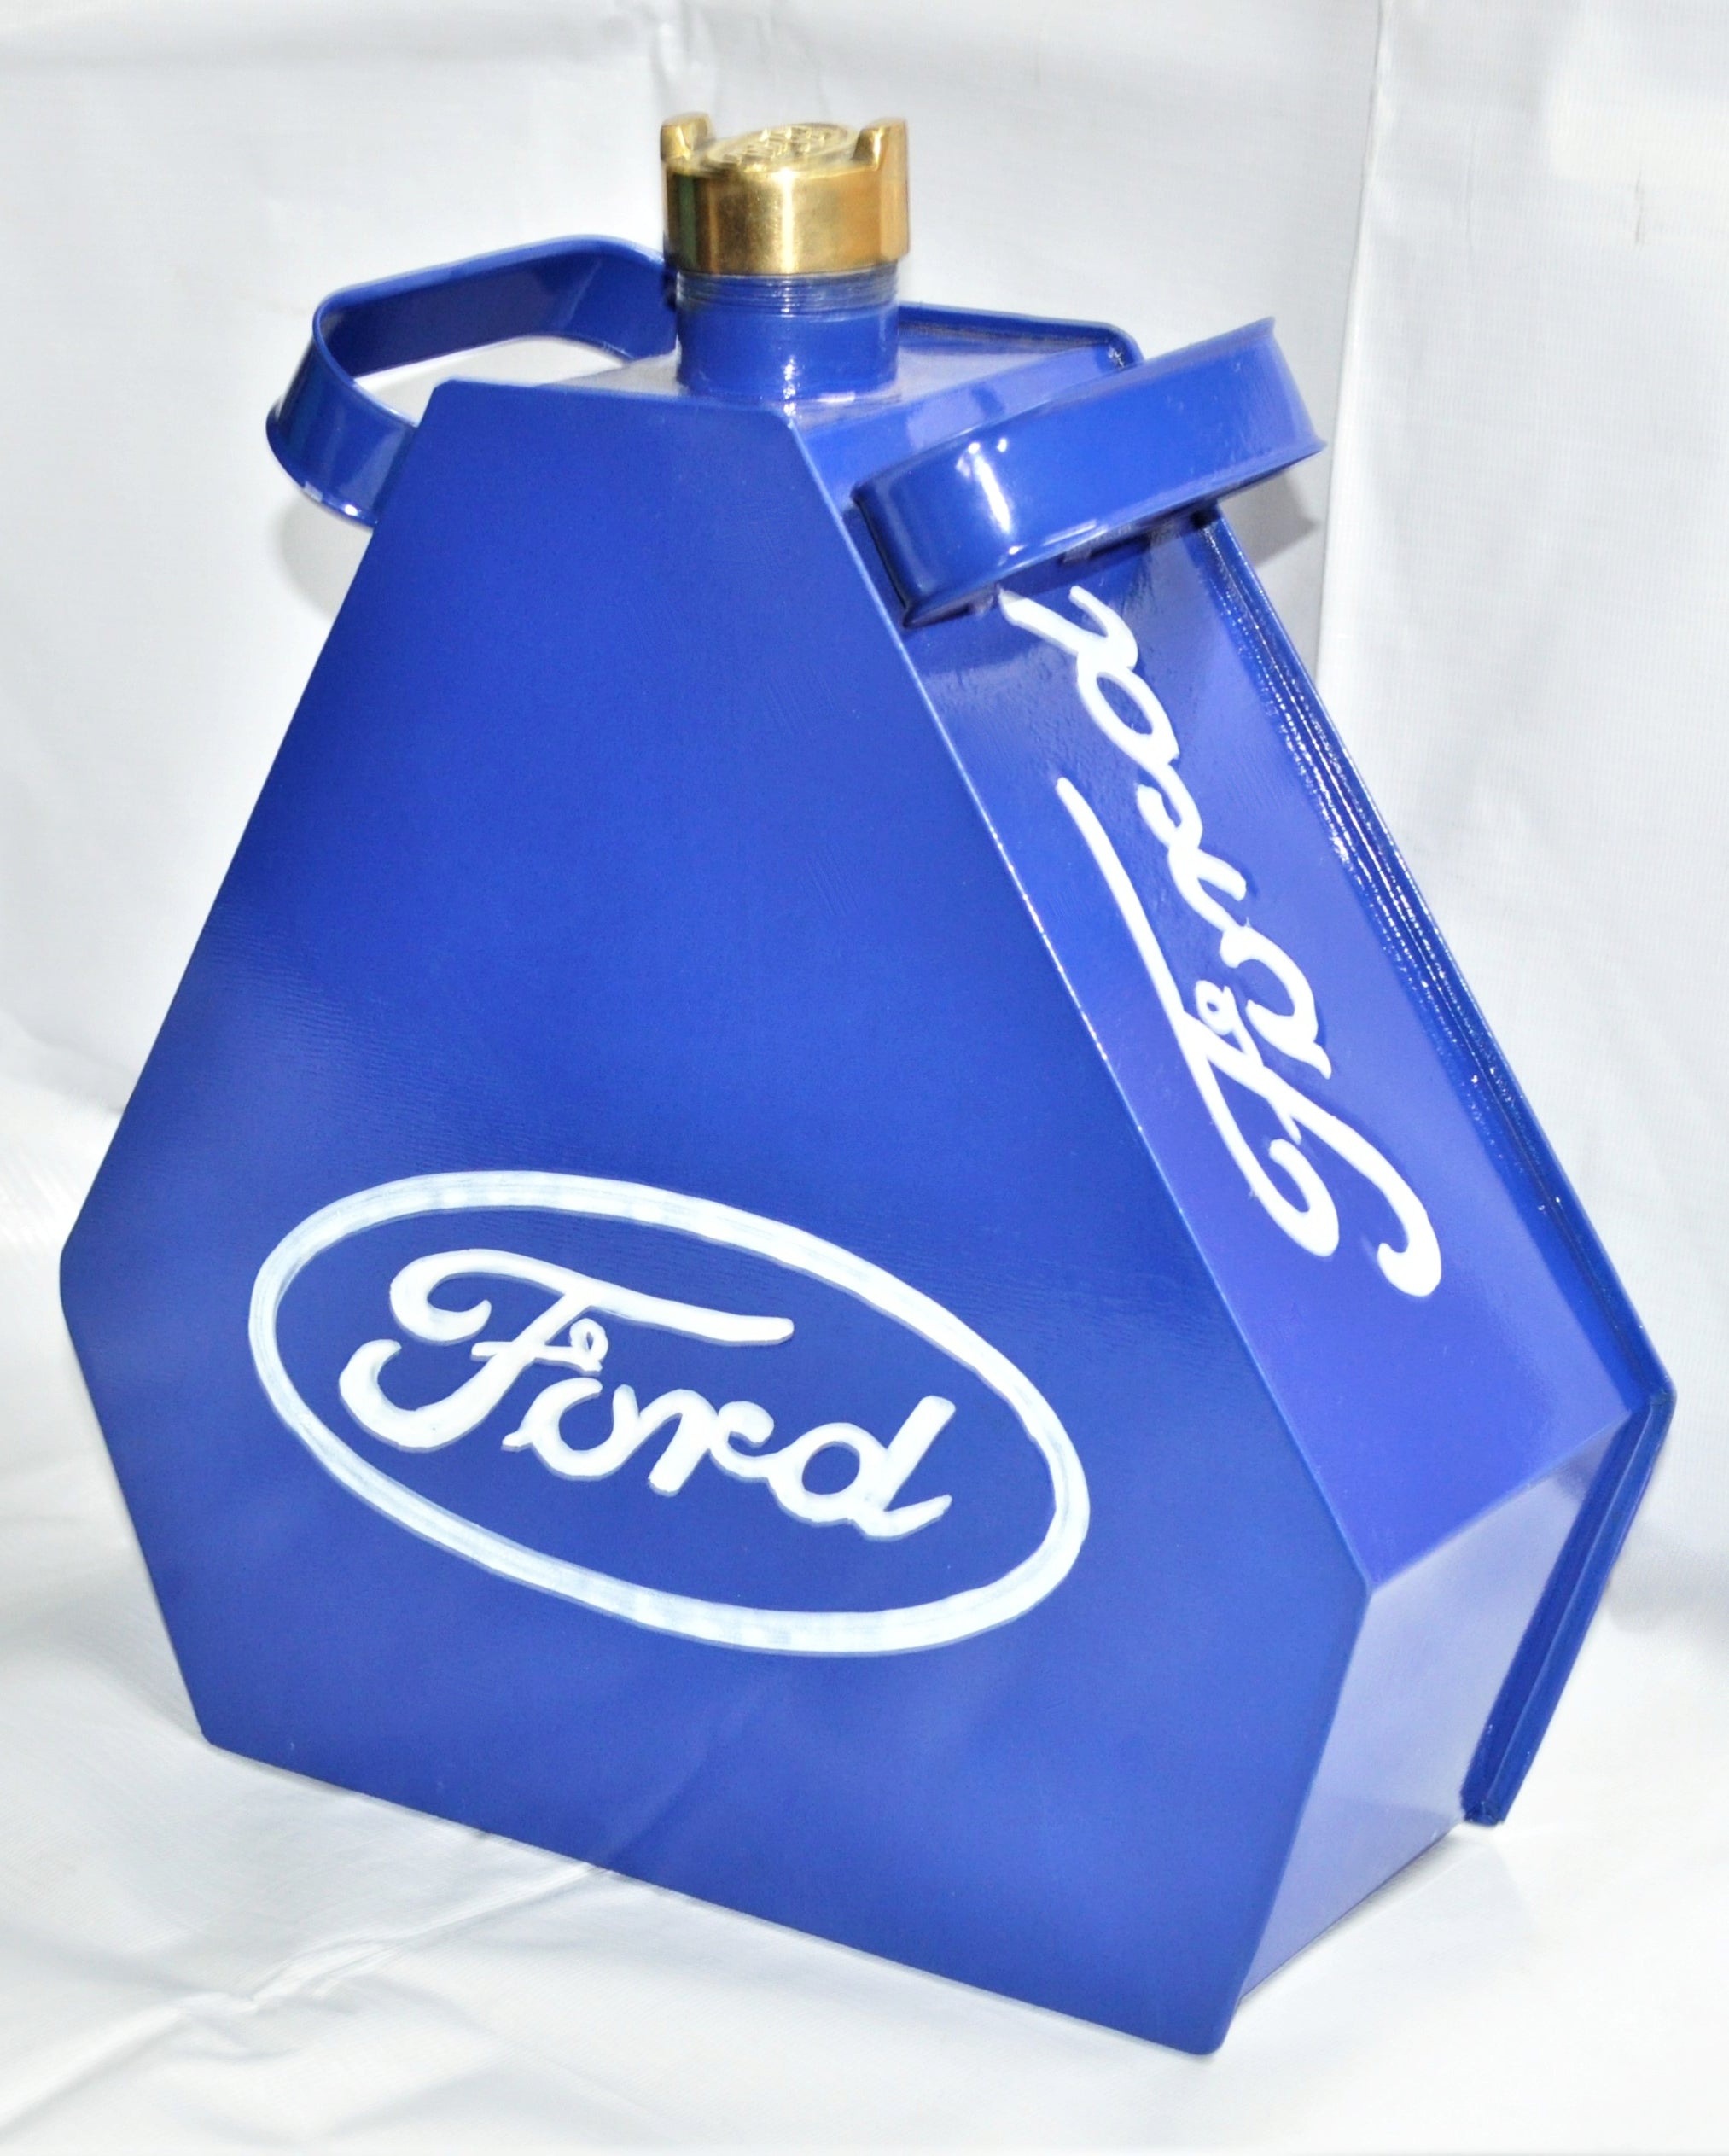 SALE Retro Hand Painted Ford Advertising Aluminium Oil Petrol Jerry can SALE